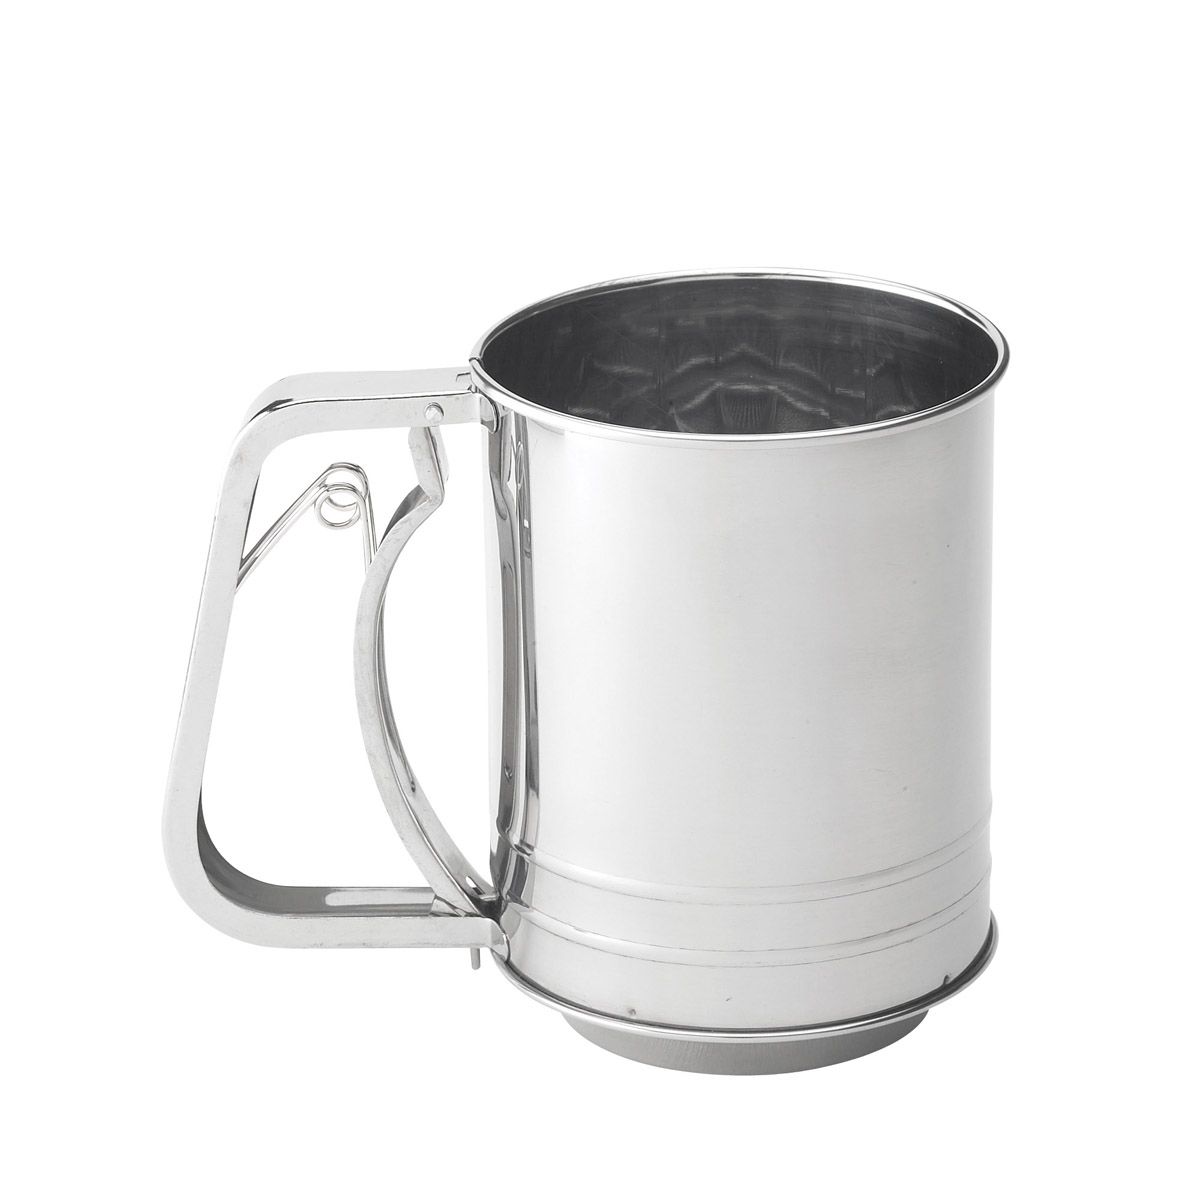 Squeeze Sifter | 3 Cup - Harold Import Company - Bluecashew Kitchen Homestead